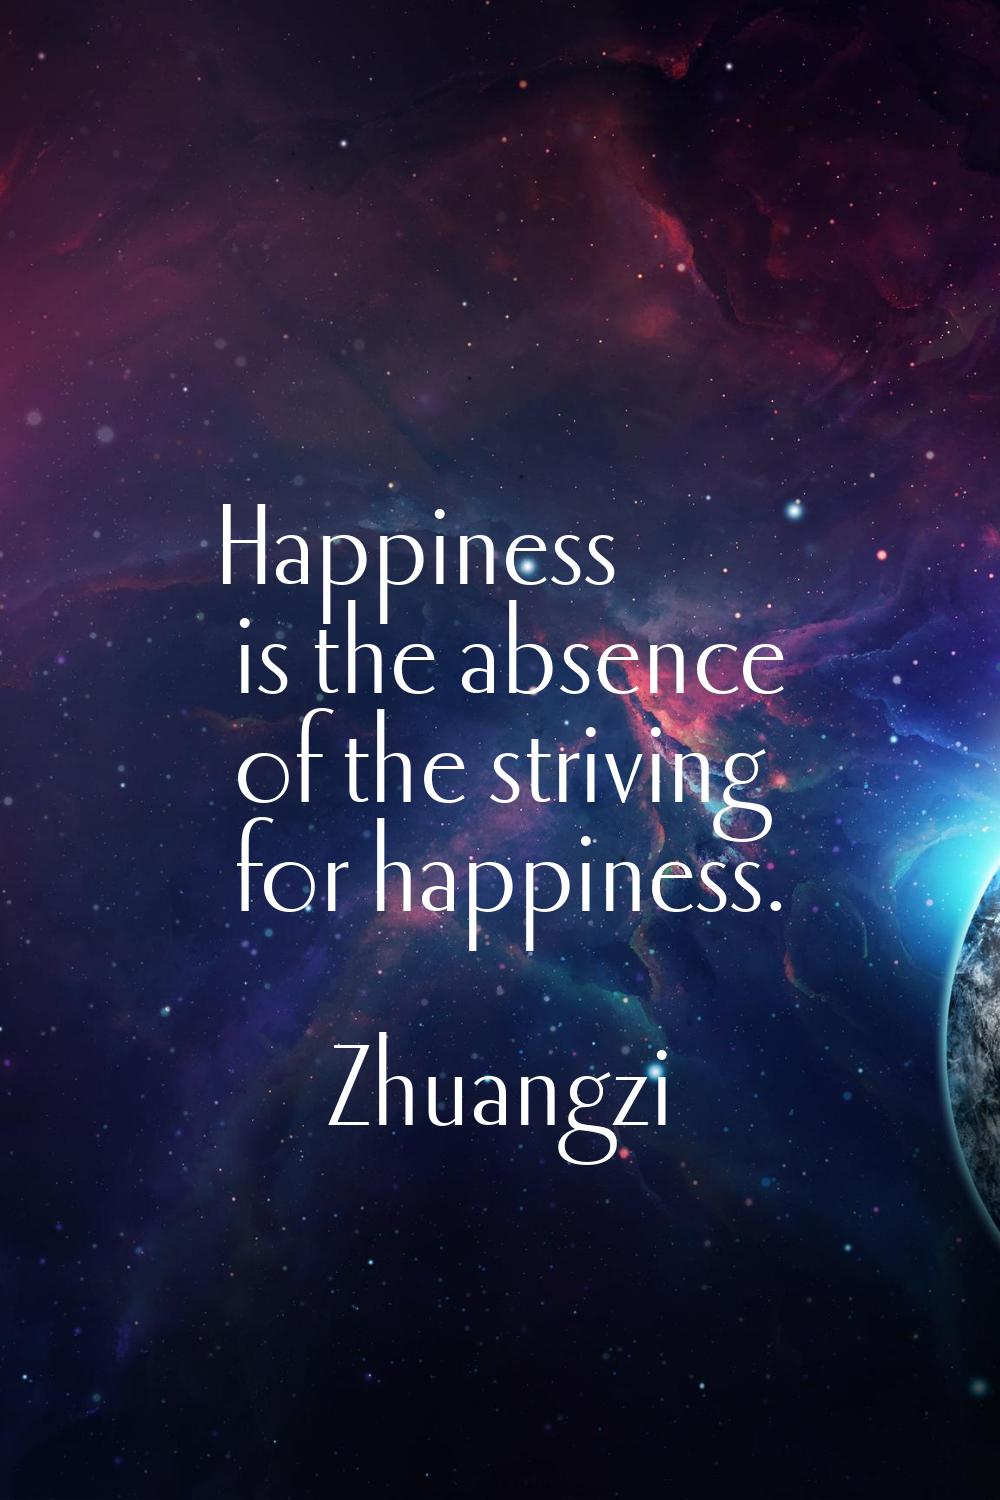 Happiness is the absence of the striving for happiness.